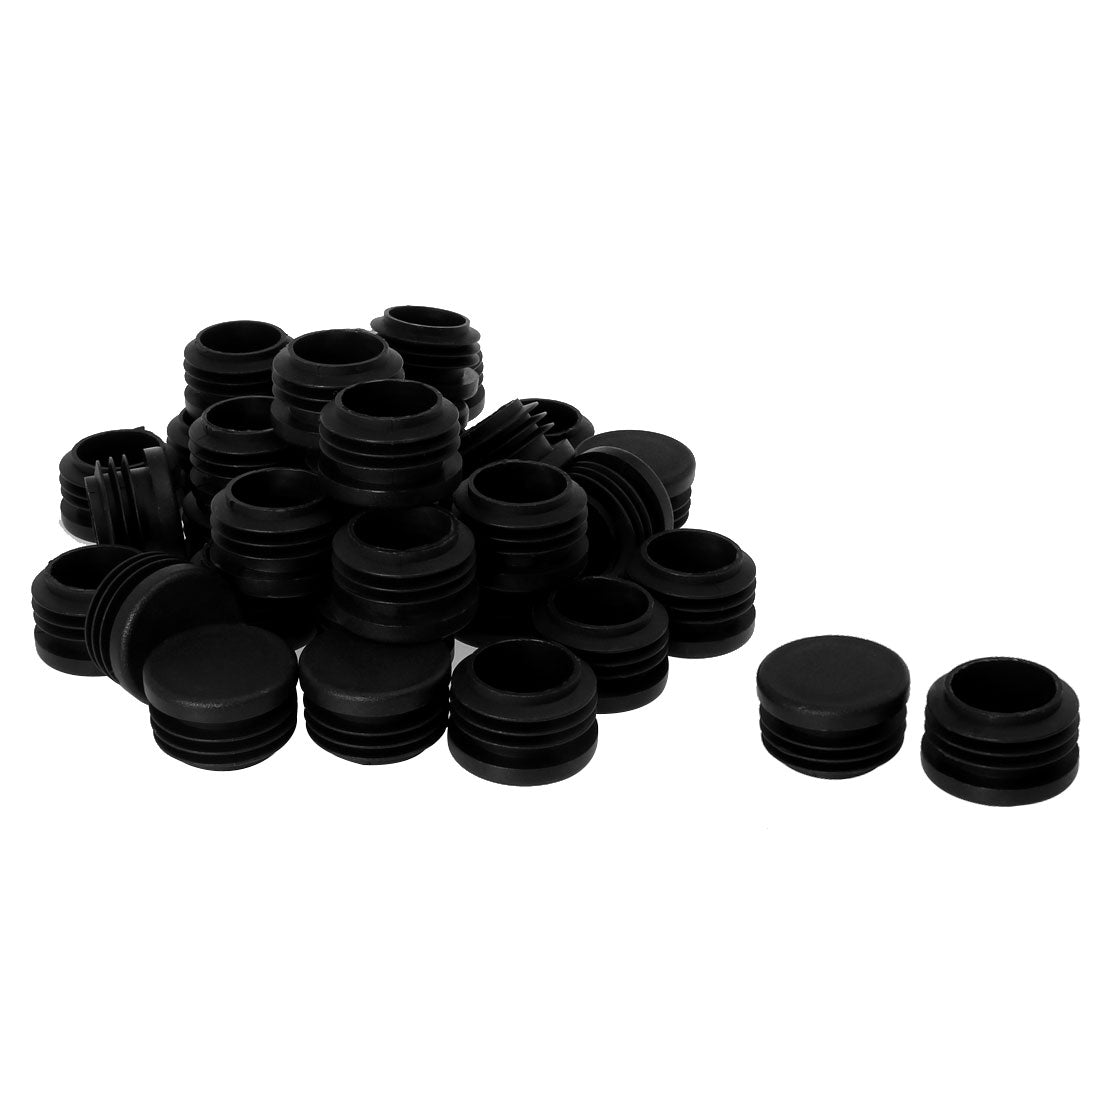 Uxcell Uxcell 1 1/4 " 1.26" OD Plastic Round Tube Insert Glide End Cap Pad 36pcs 1.14"-1.22" Inner Dia for Office Furniture Table Anti Scratch